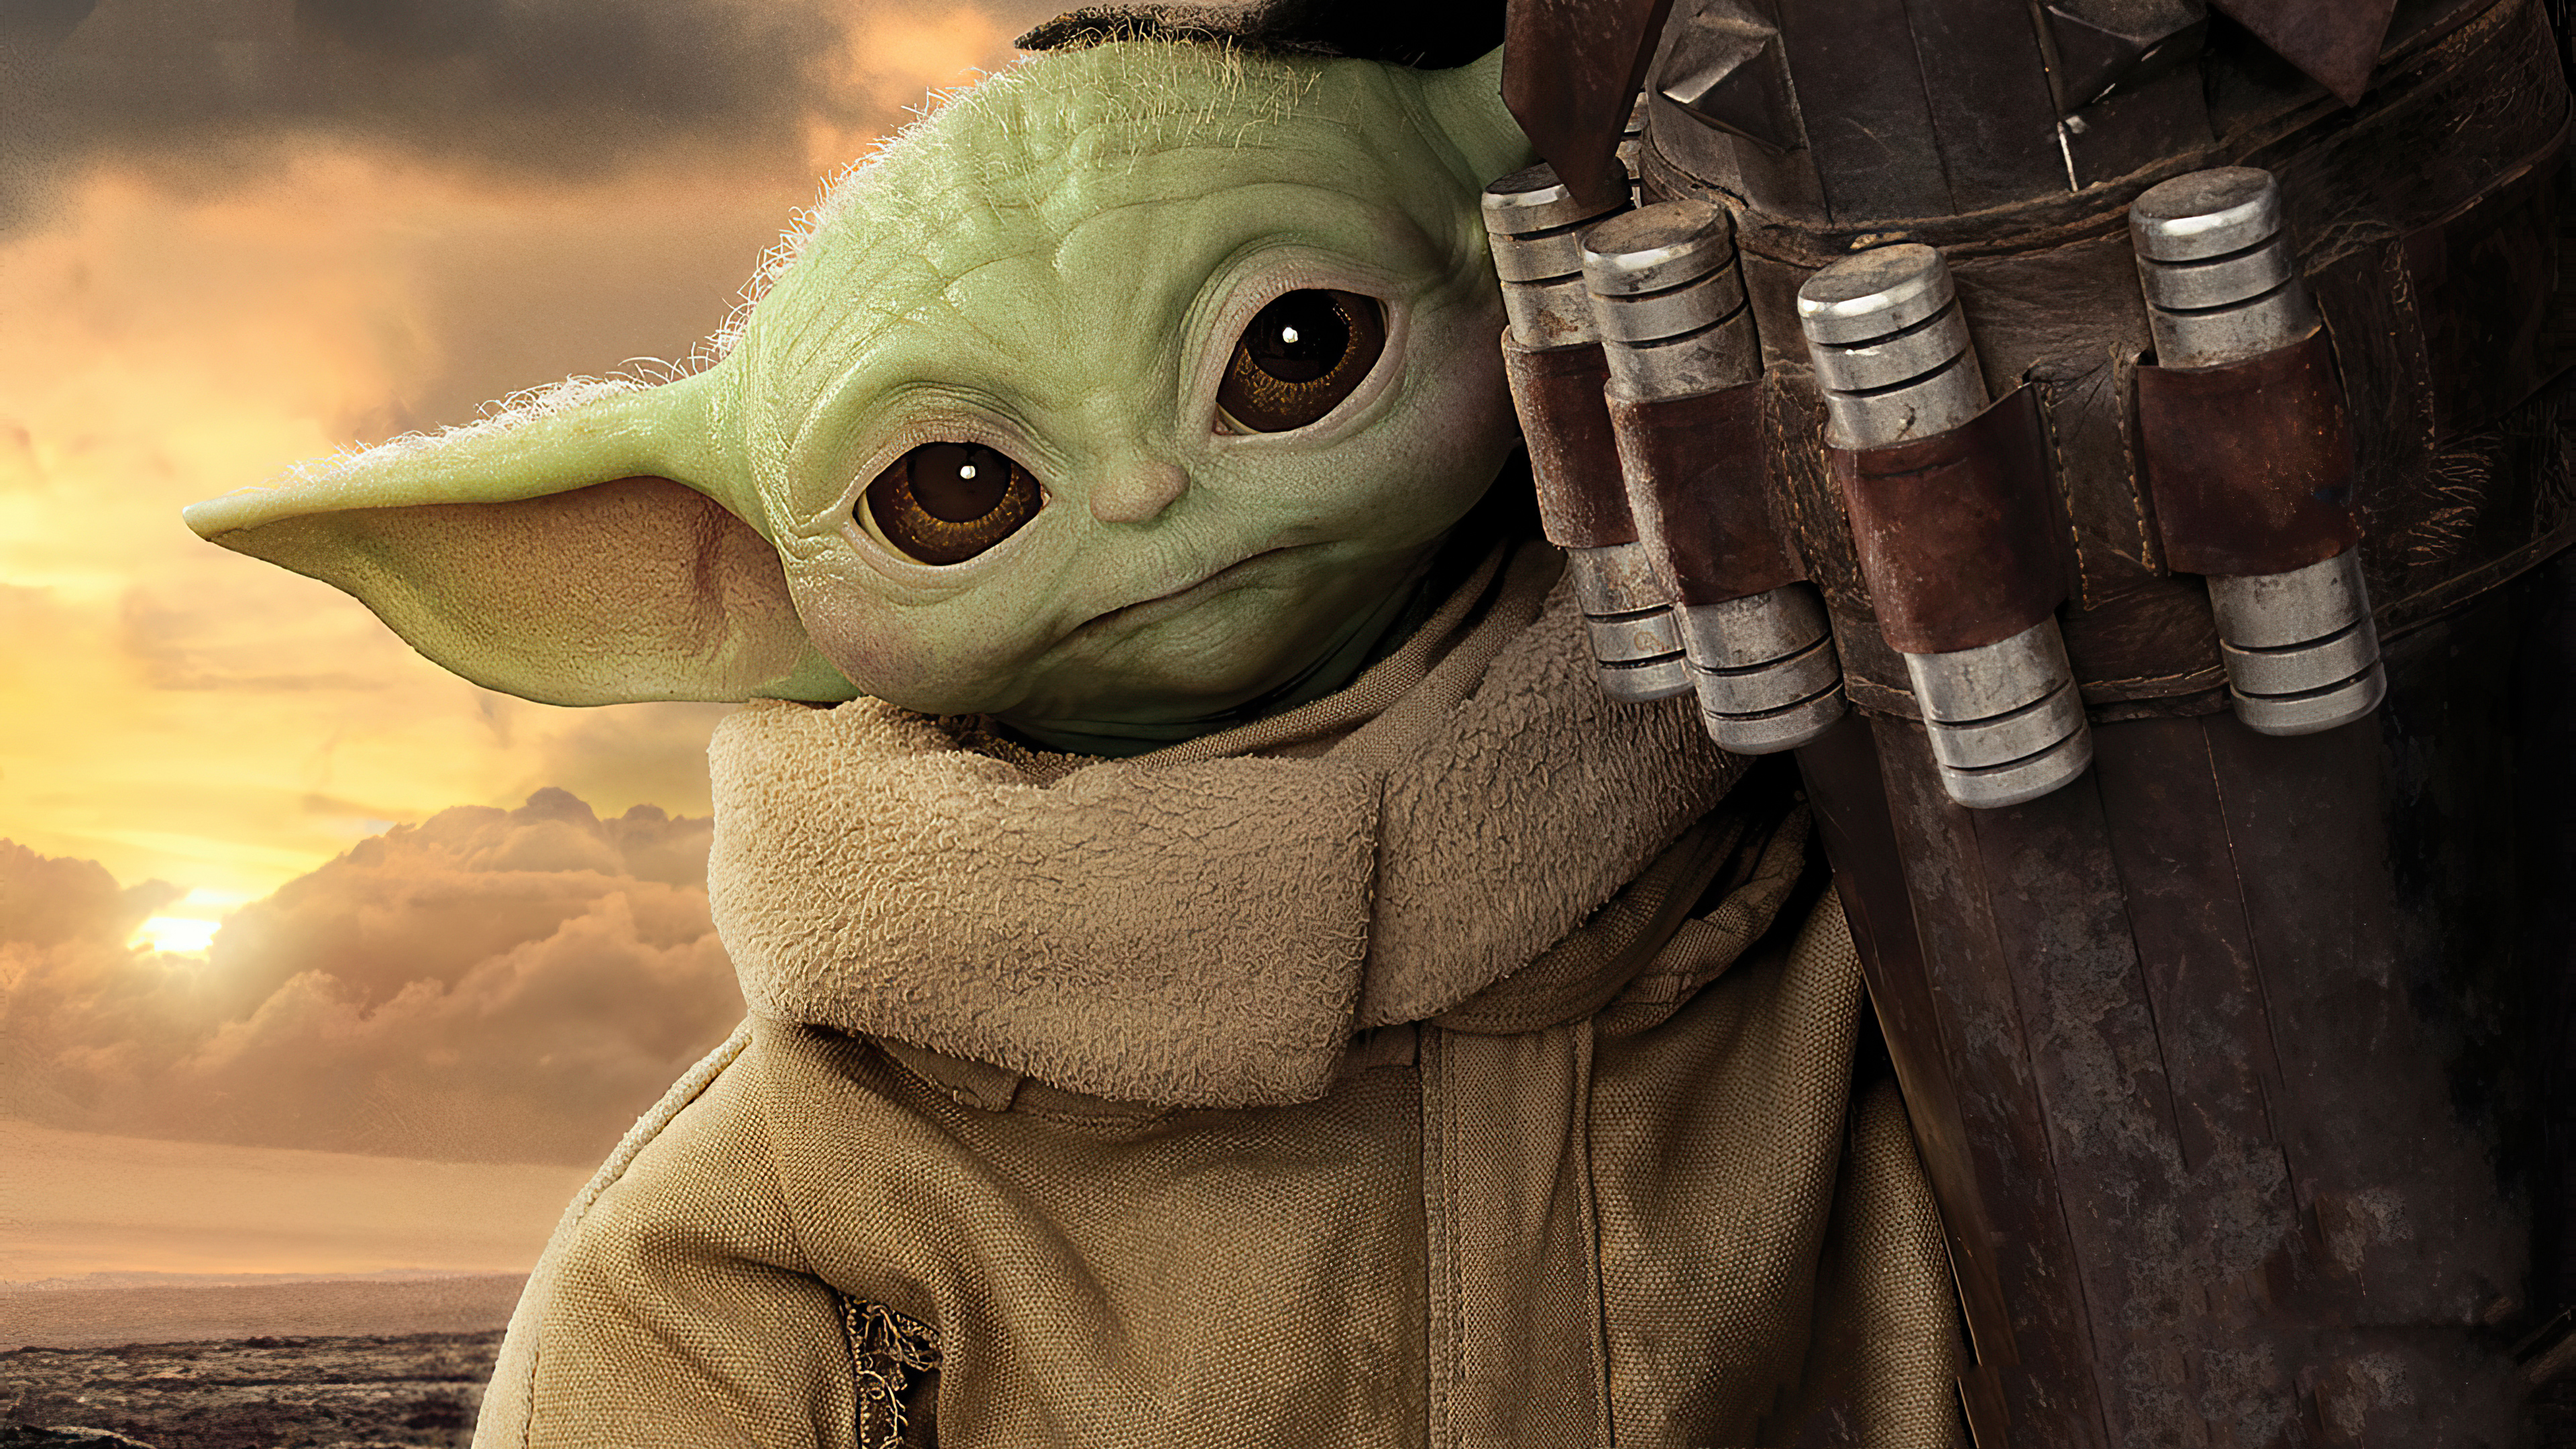 Baby Yoda Star Wars Green Baby Yoda With Background Of Clouds And Sunrise 4K HD Movies Wallpaper